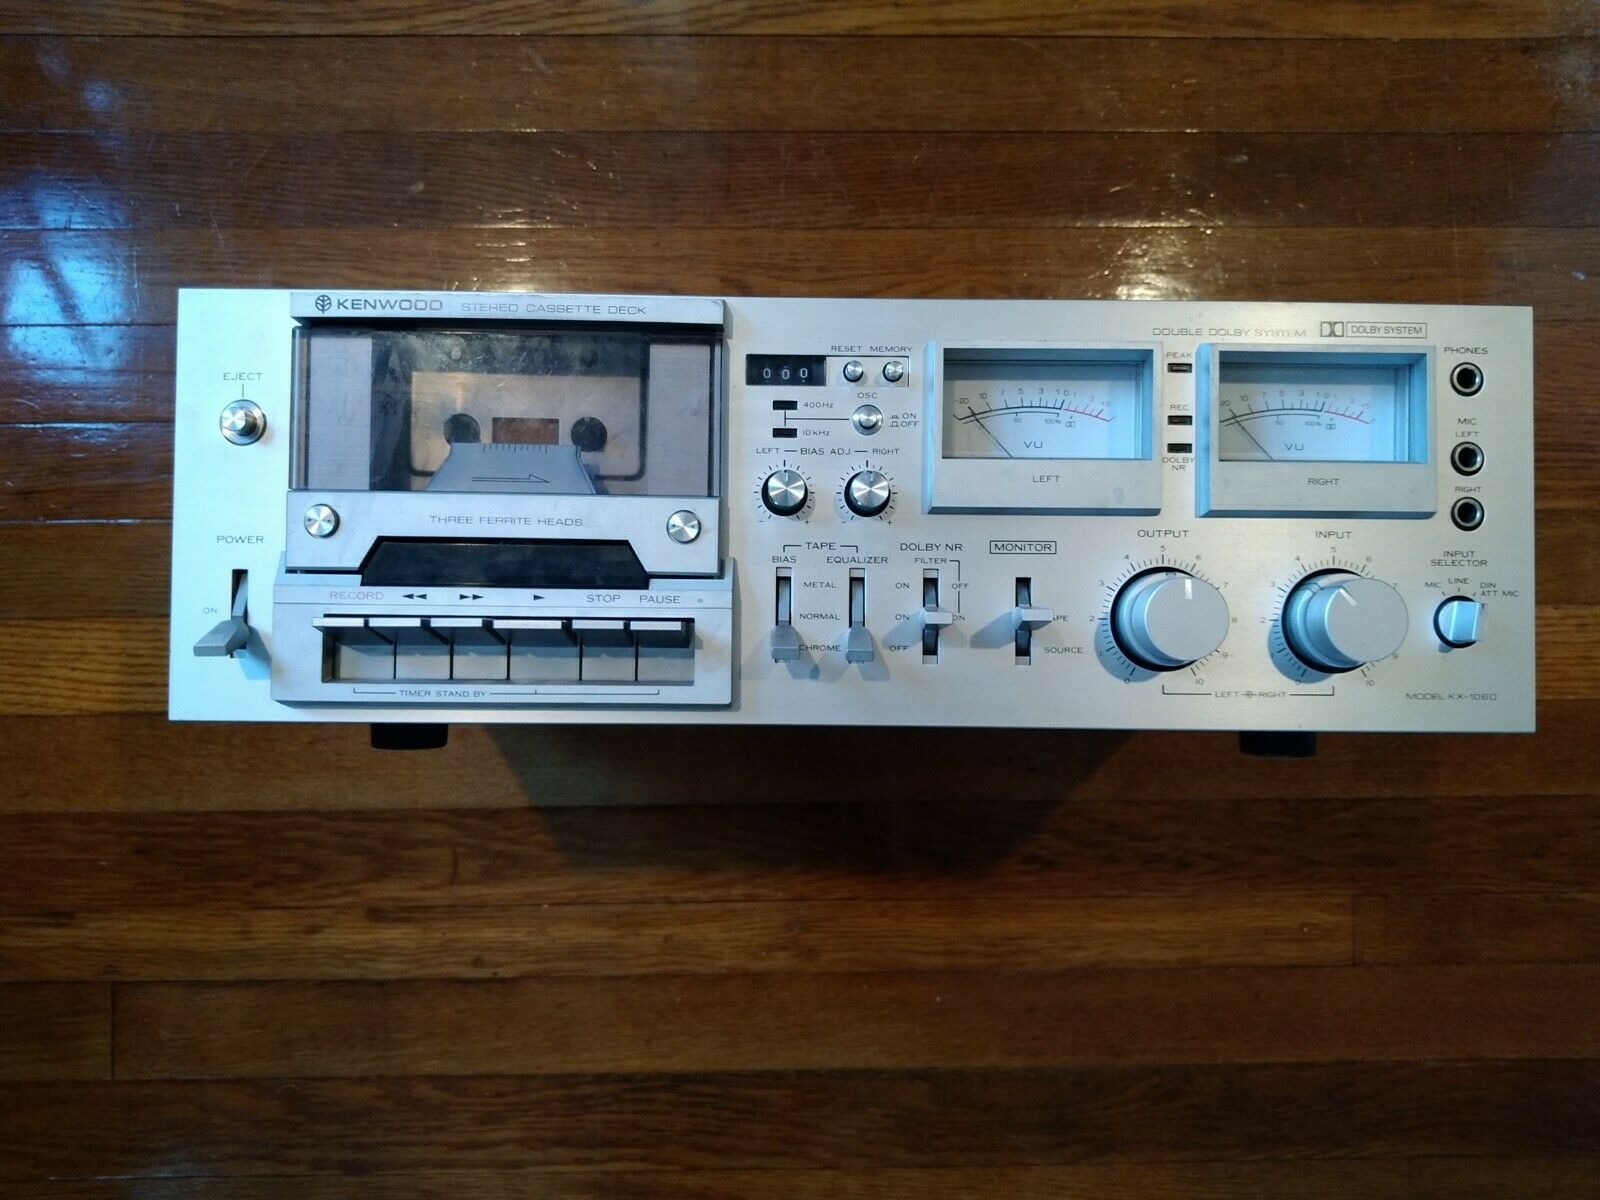 Kenwood Stereo Cassette Deck  Kx-1060 - For Parts/repair